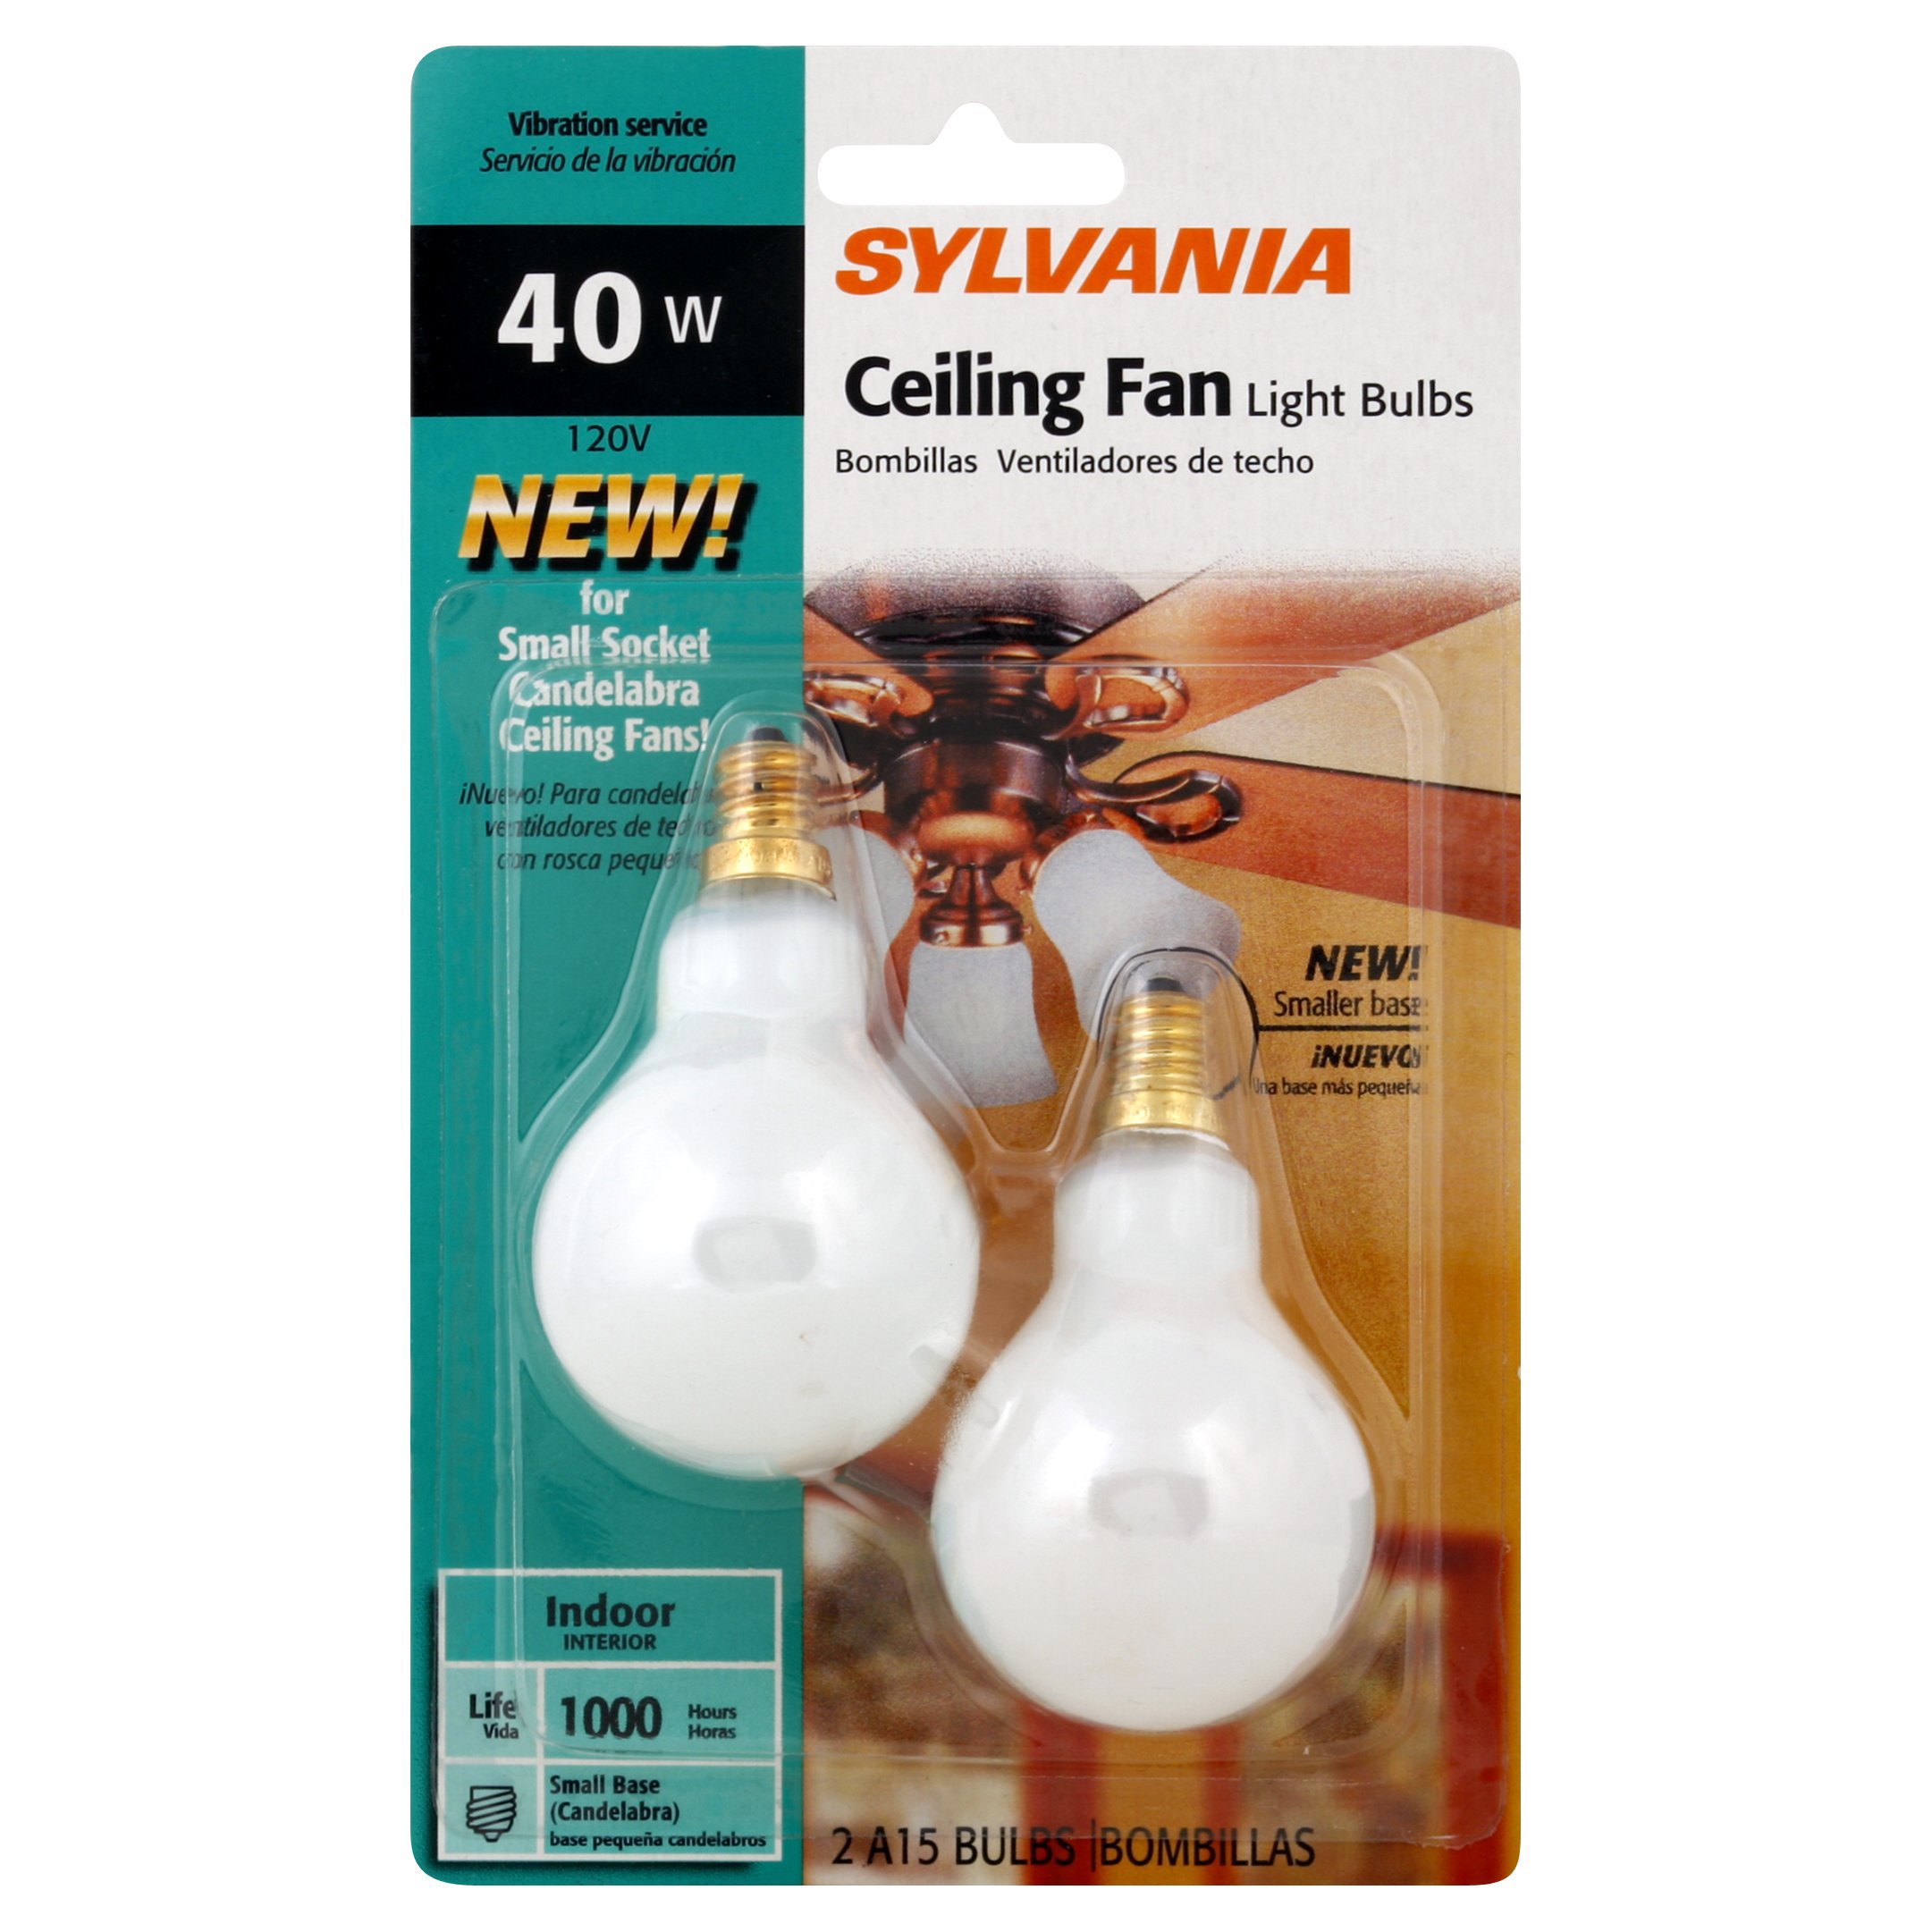 Sylvania 40 Watt A15 Frost Ceiling Fan Light Bulbs Home Improvement At H E B - Are There Special Light Bulbs For Ceiling Fans